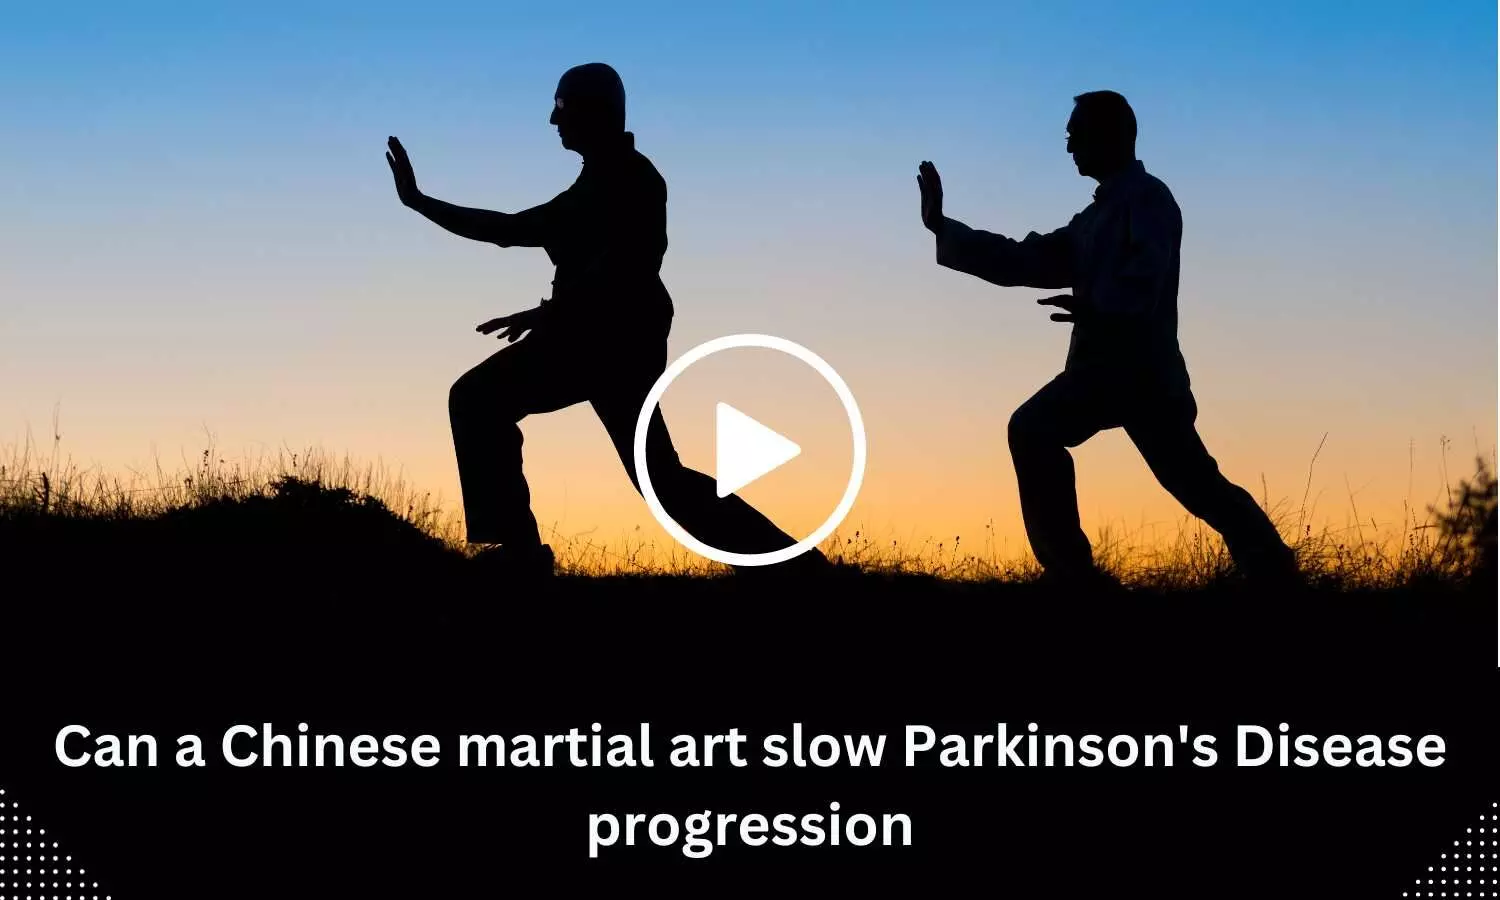 Can a Chinese martial art slow Parkinsons Disease progression